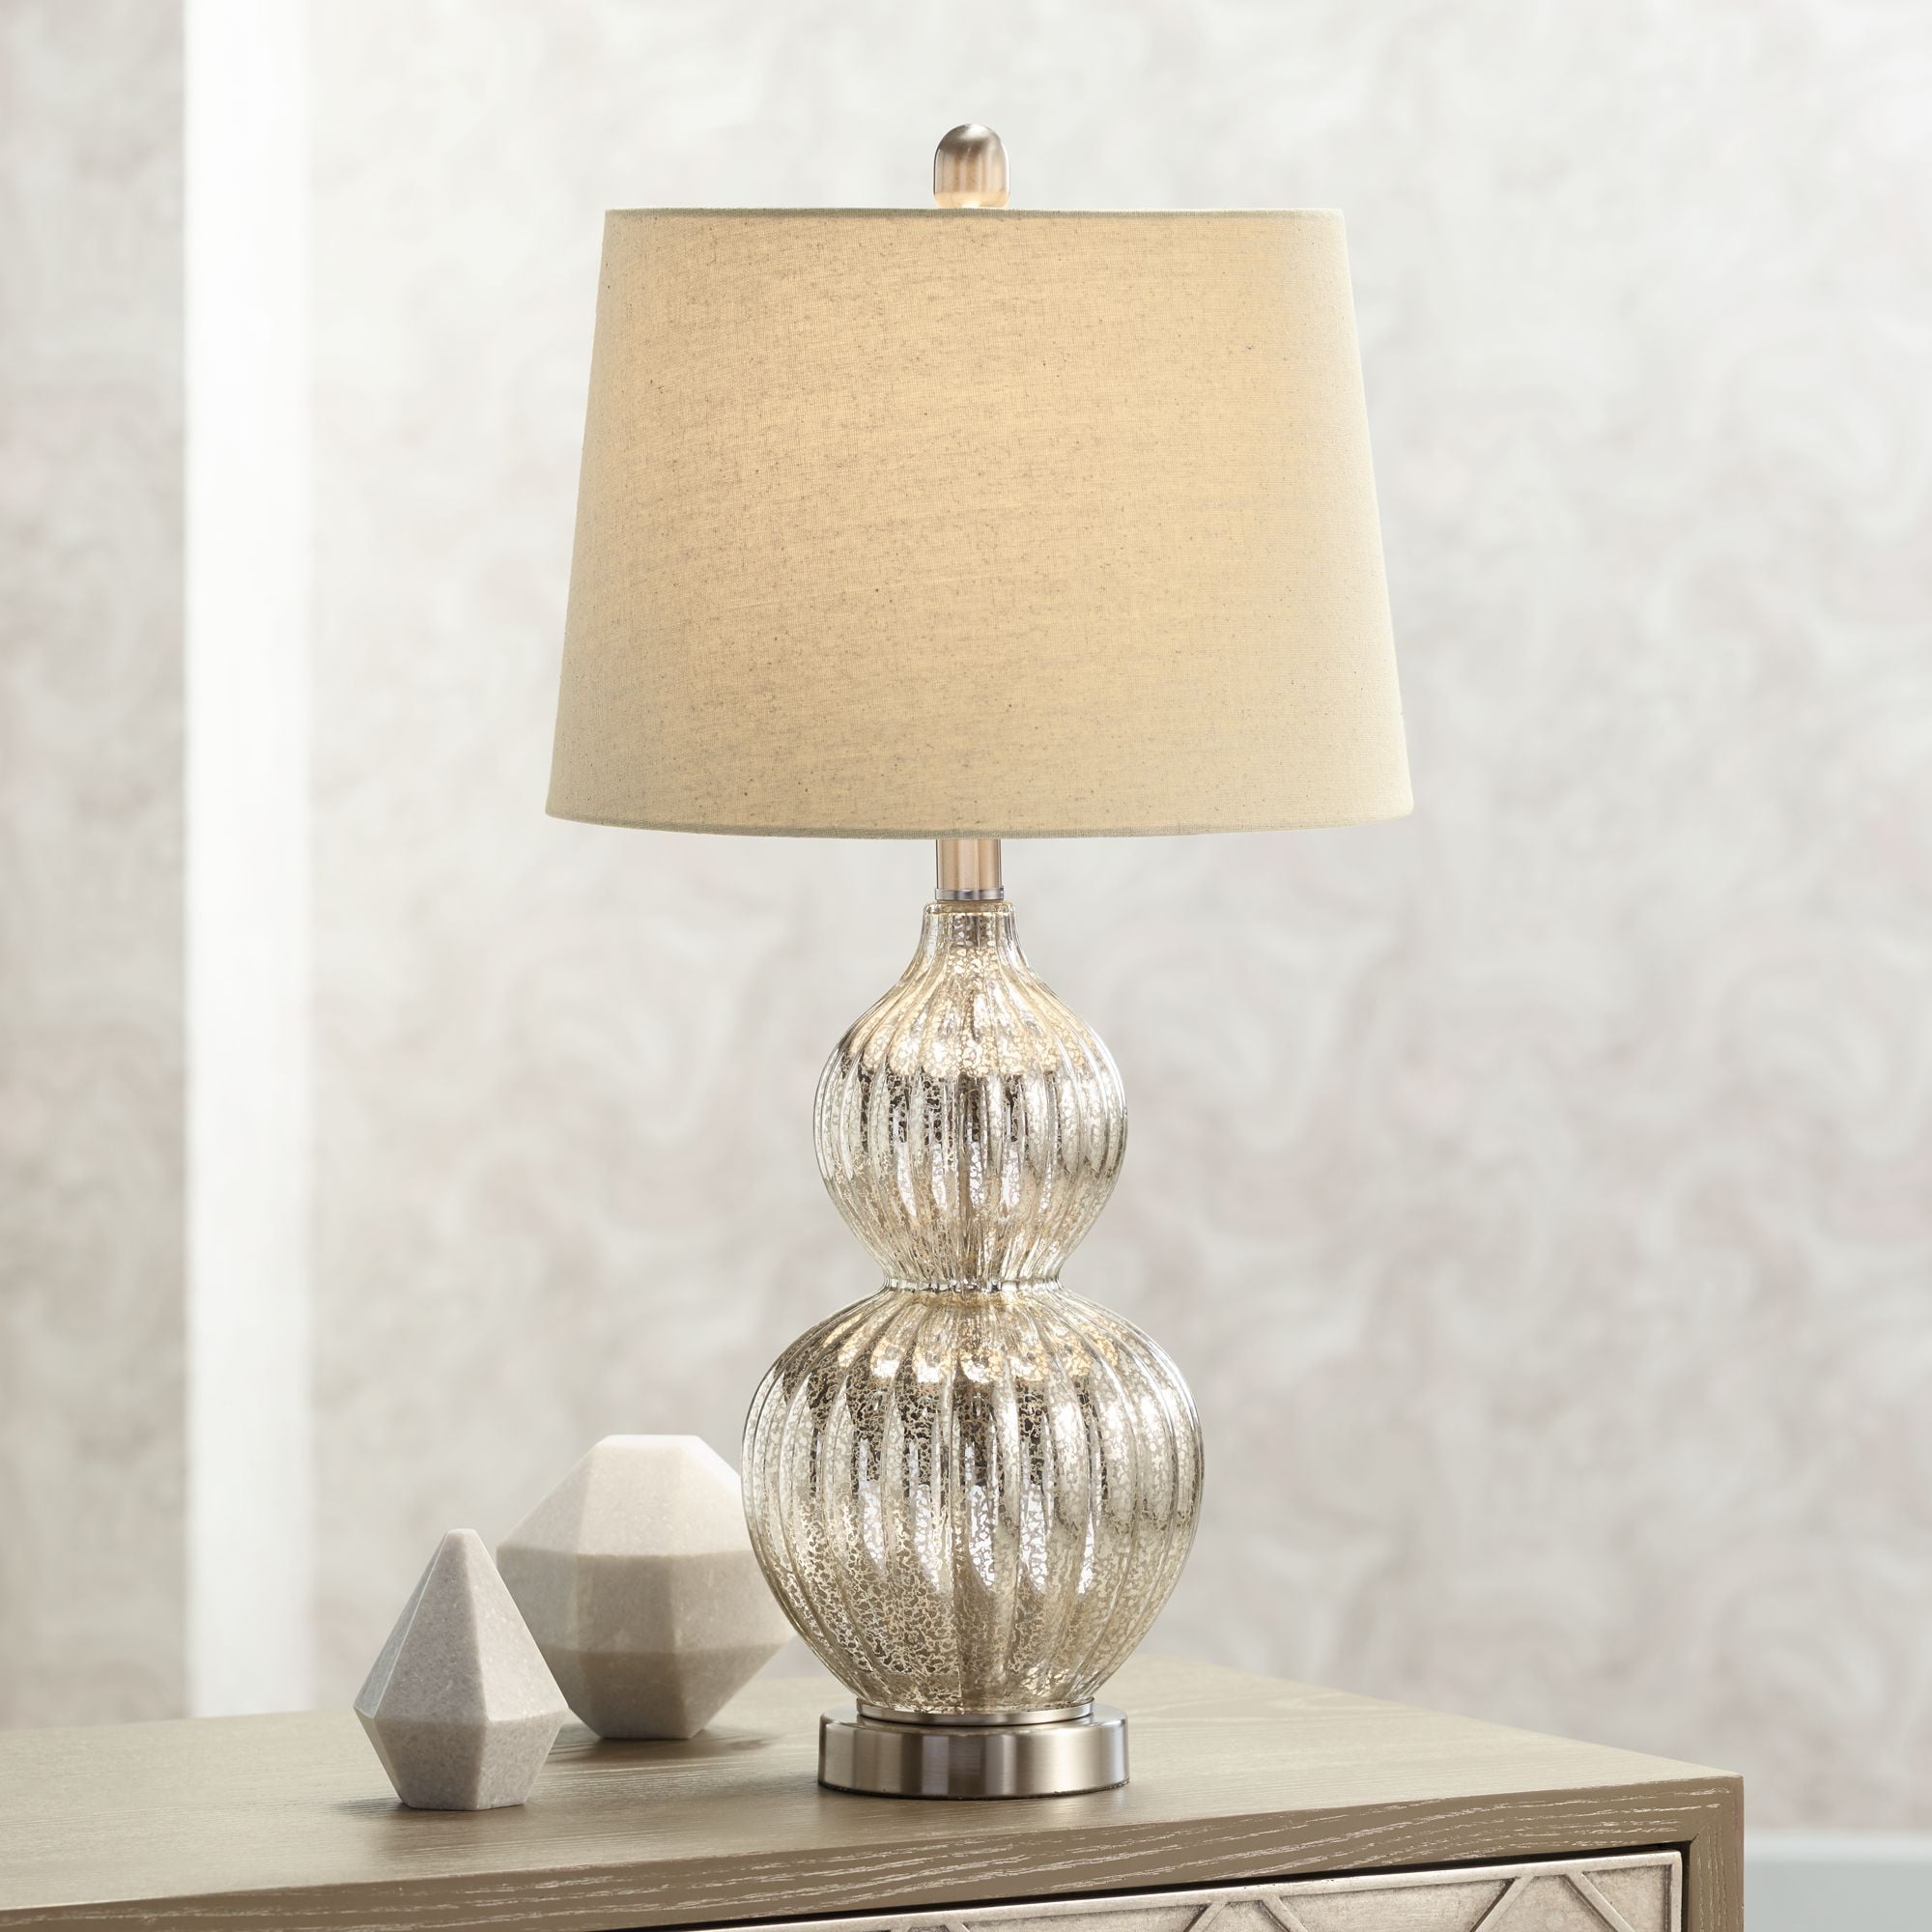 Regency Hill Cottage Table Lamp Silver, Silver Mercury Glass Round Table Lamp